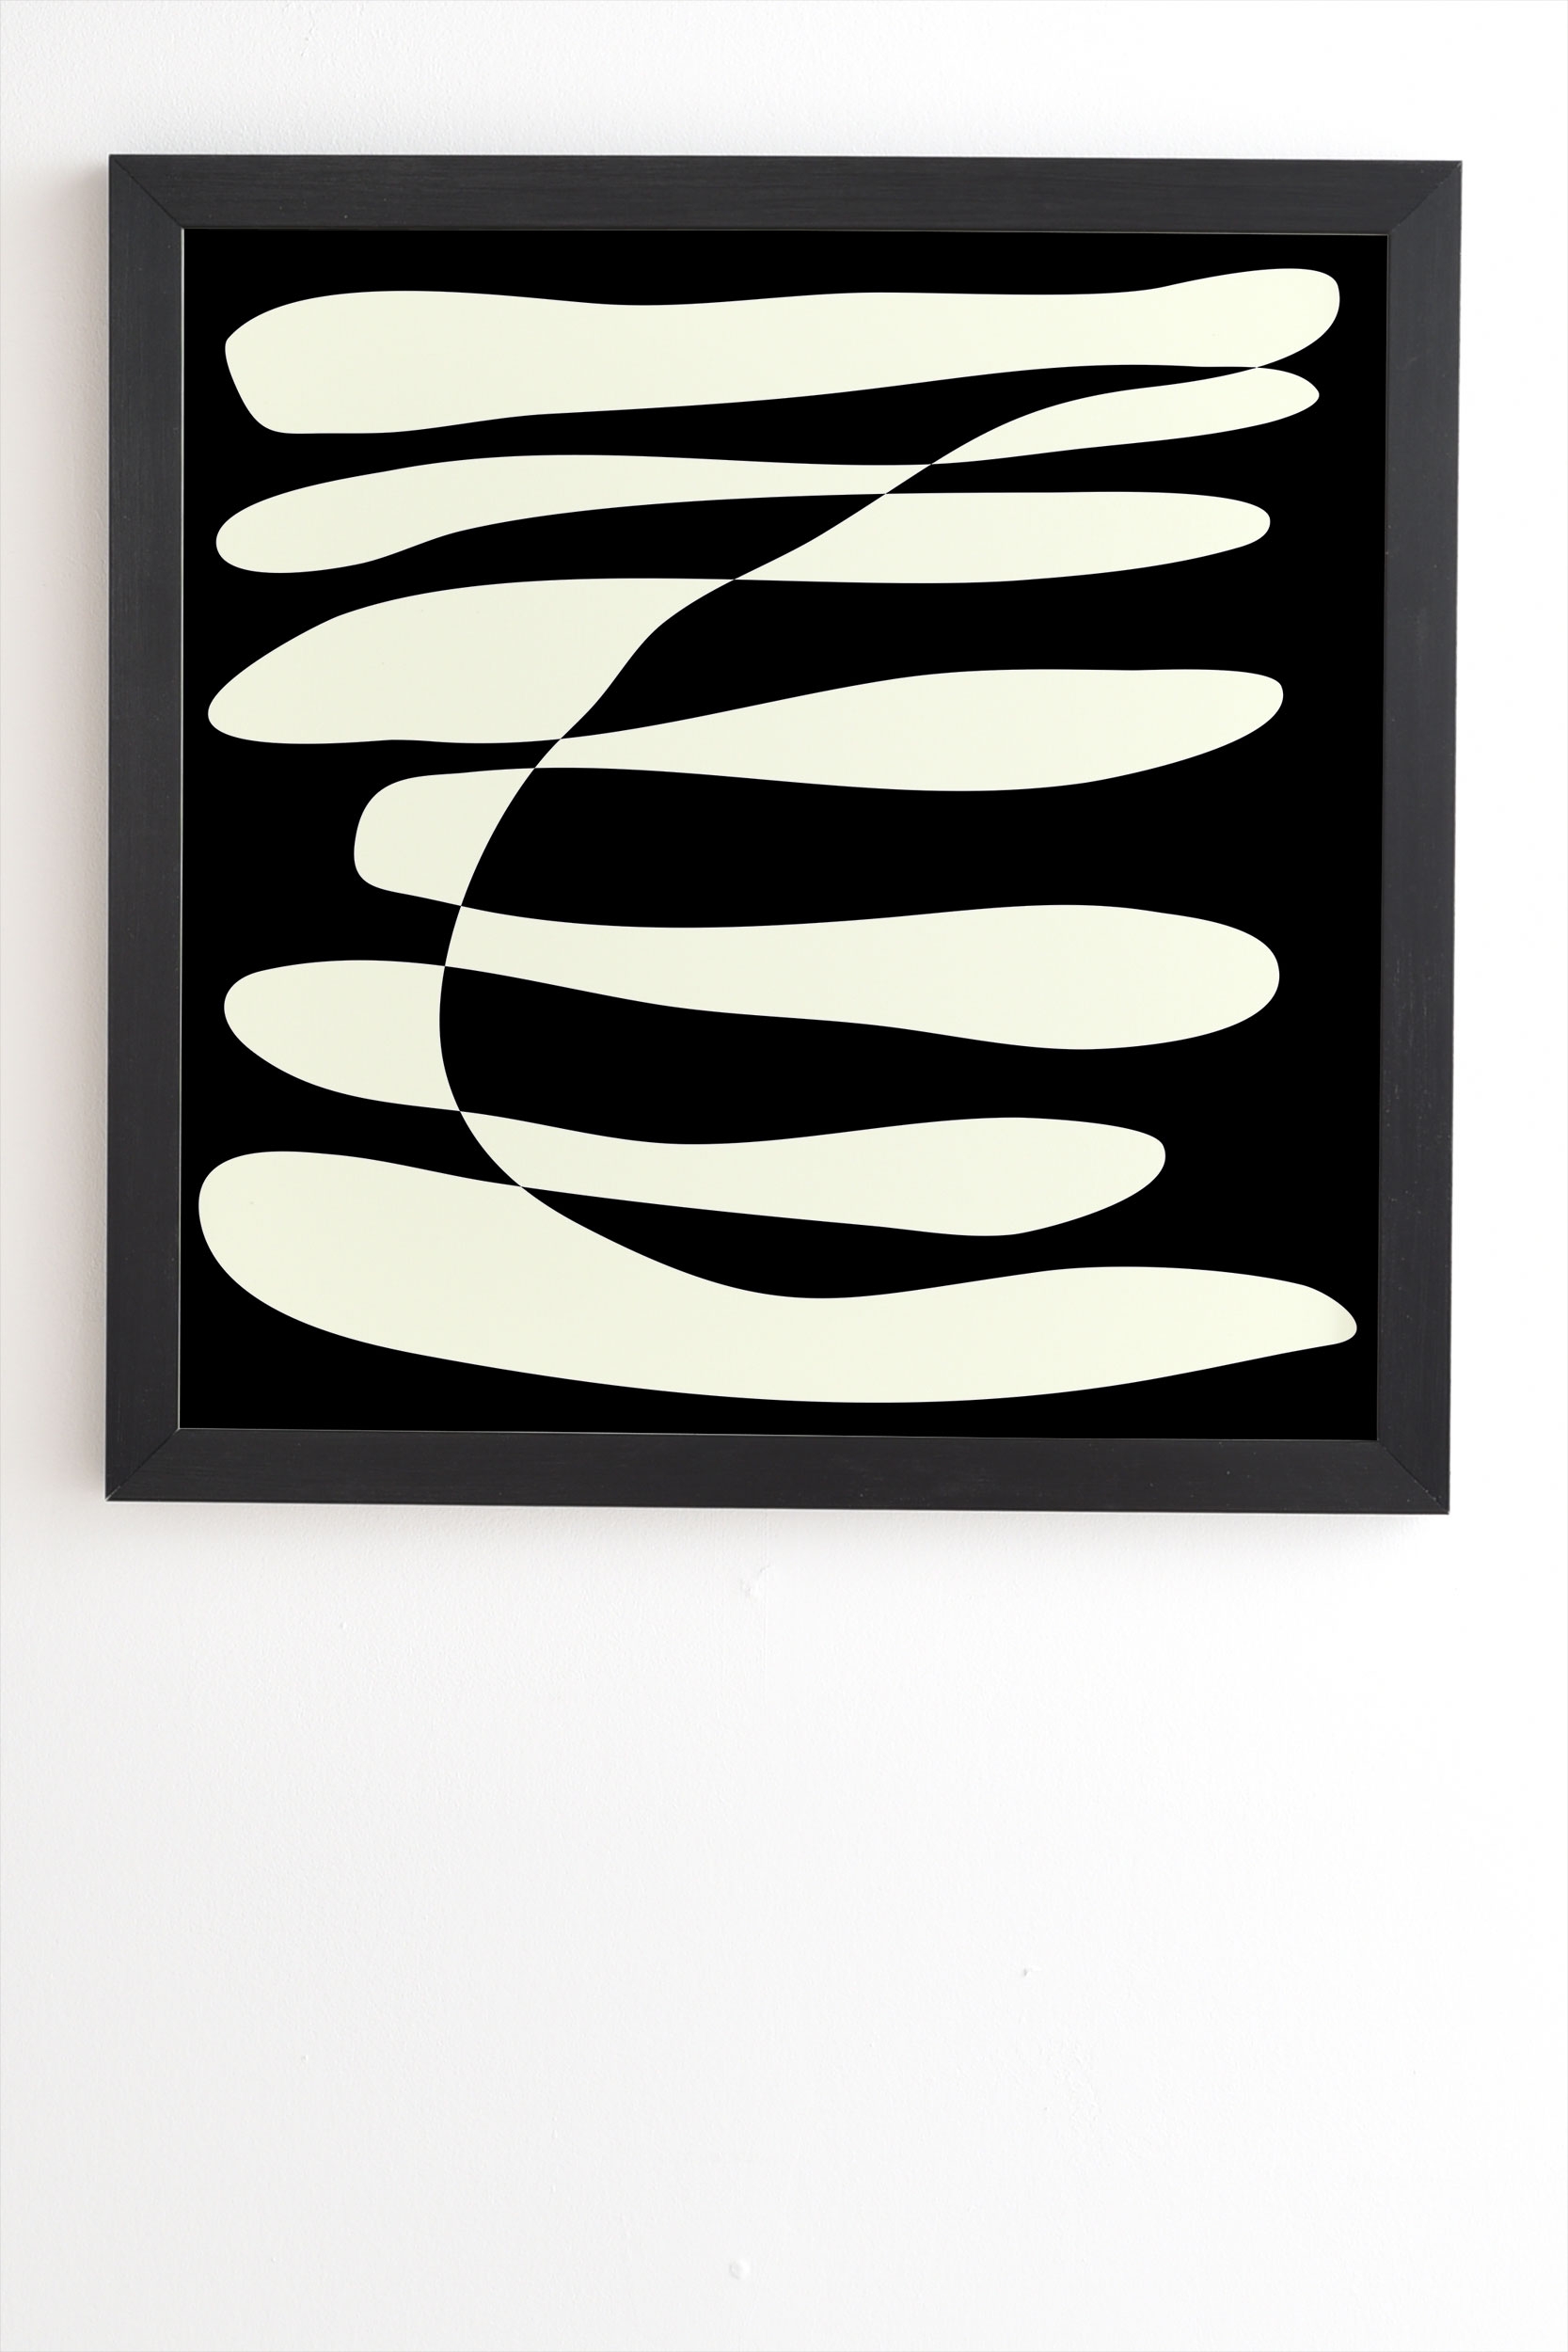 Abstract Composition In Black by June Journal - Framed Wall Art Basic Black 14" x 16.5" - Image 1